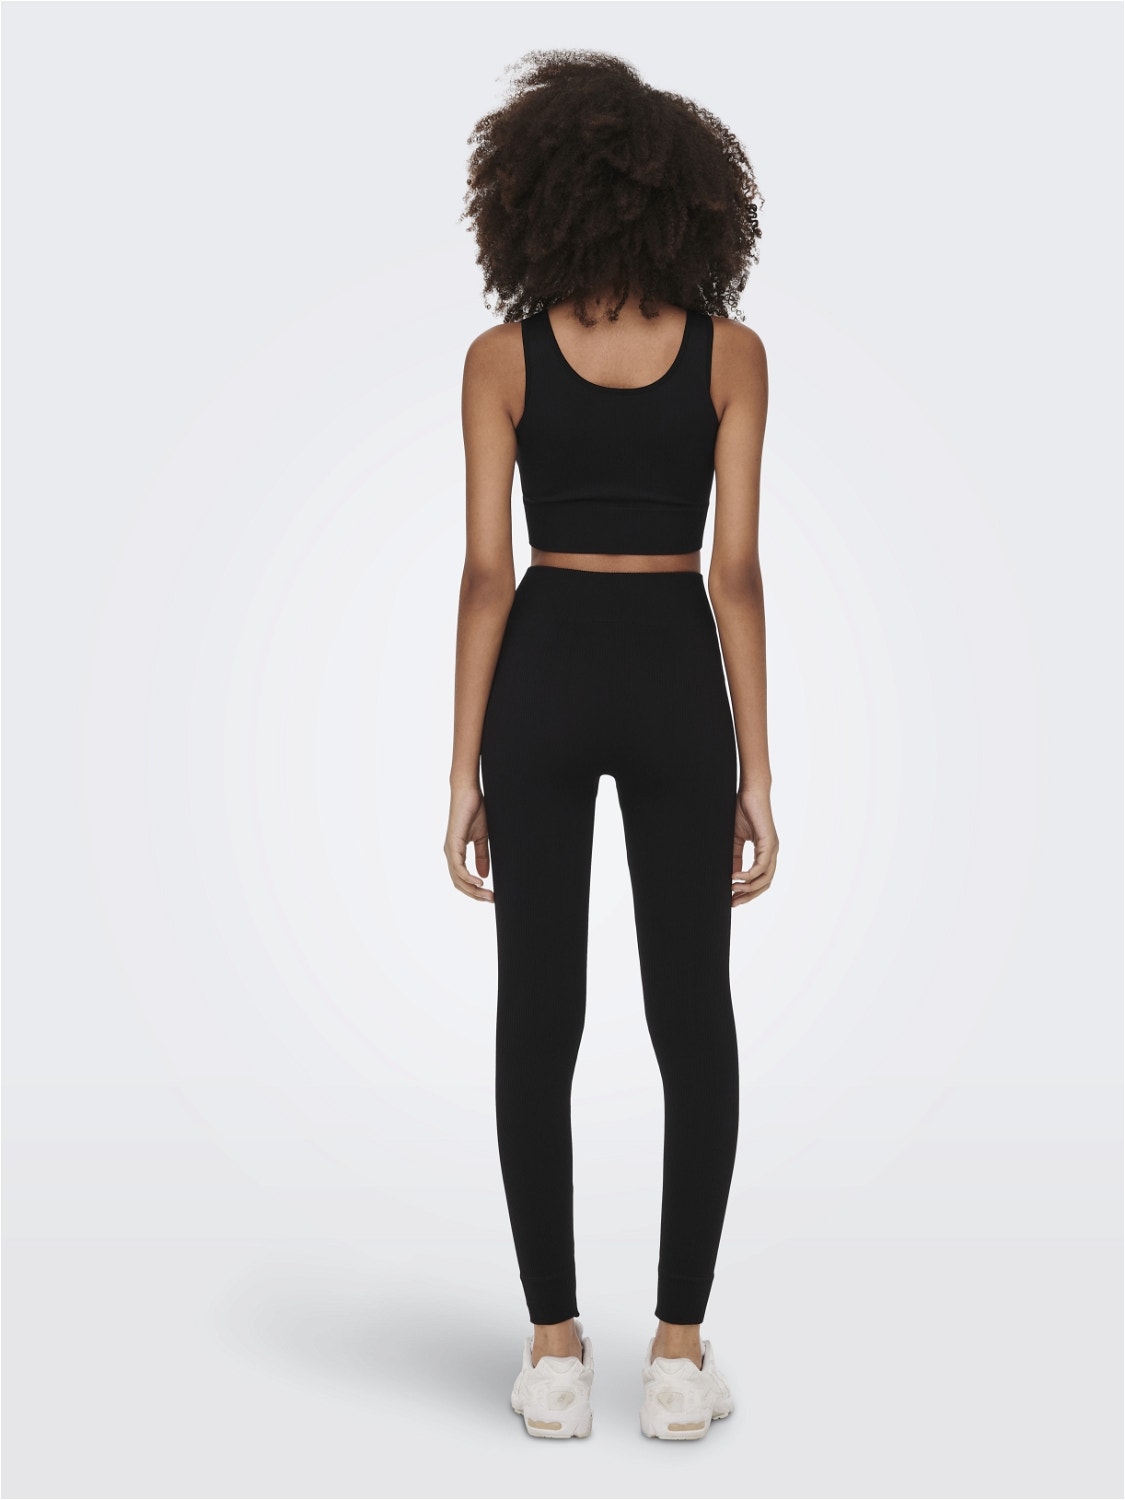 ONLY Tight fit High waist Legging -Black - 15250052